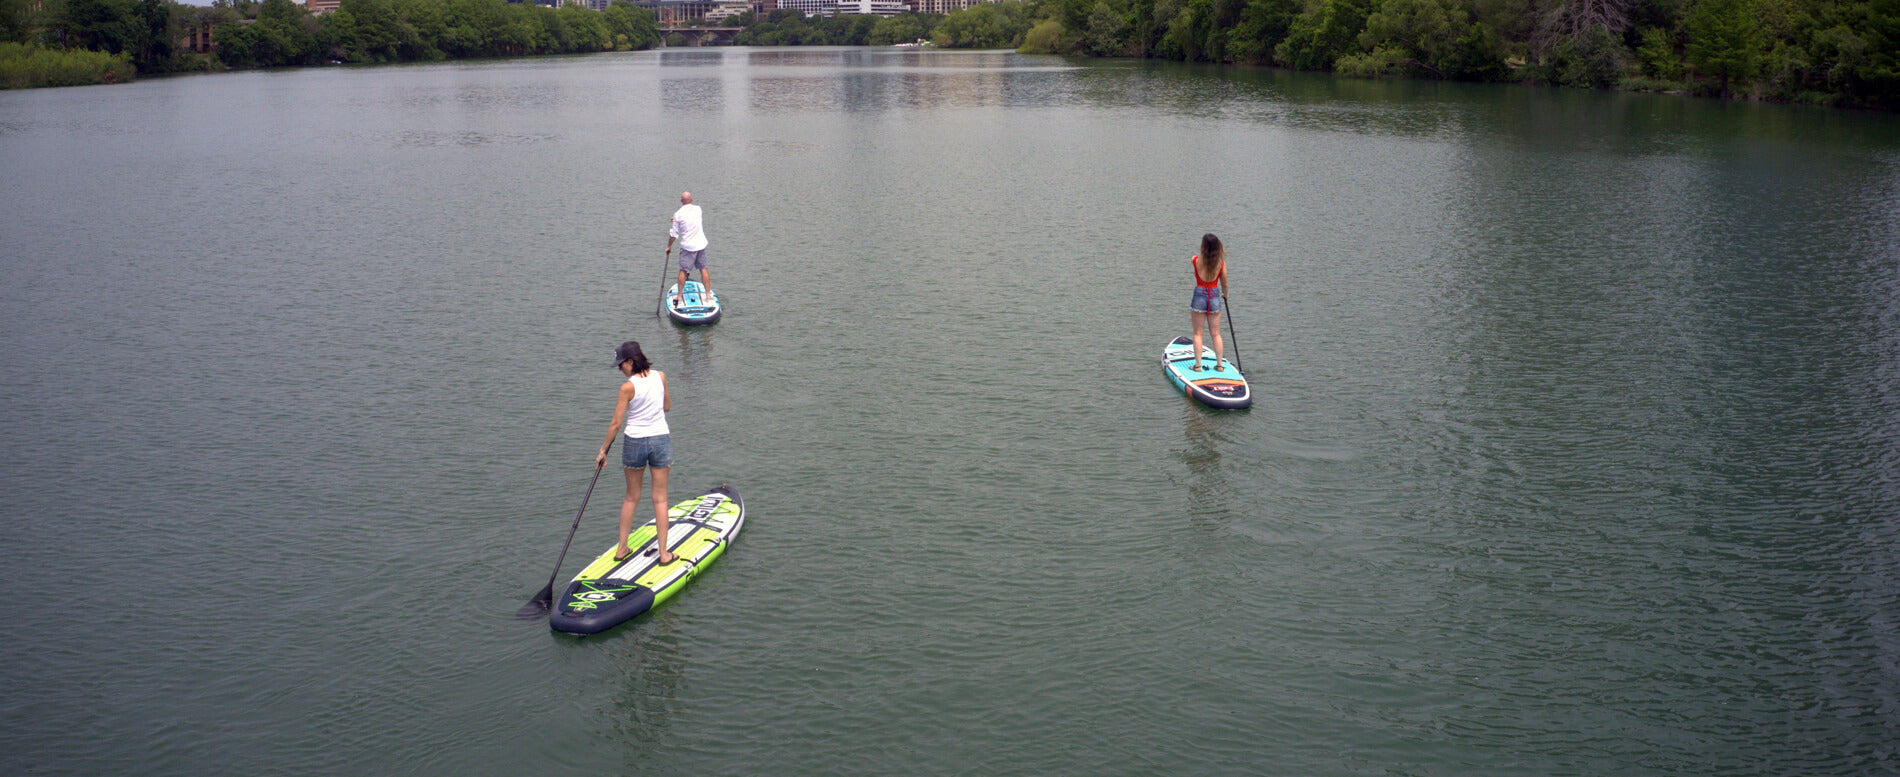 Man and a woman paddle boarding on a river